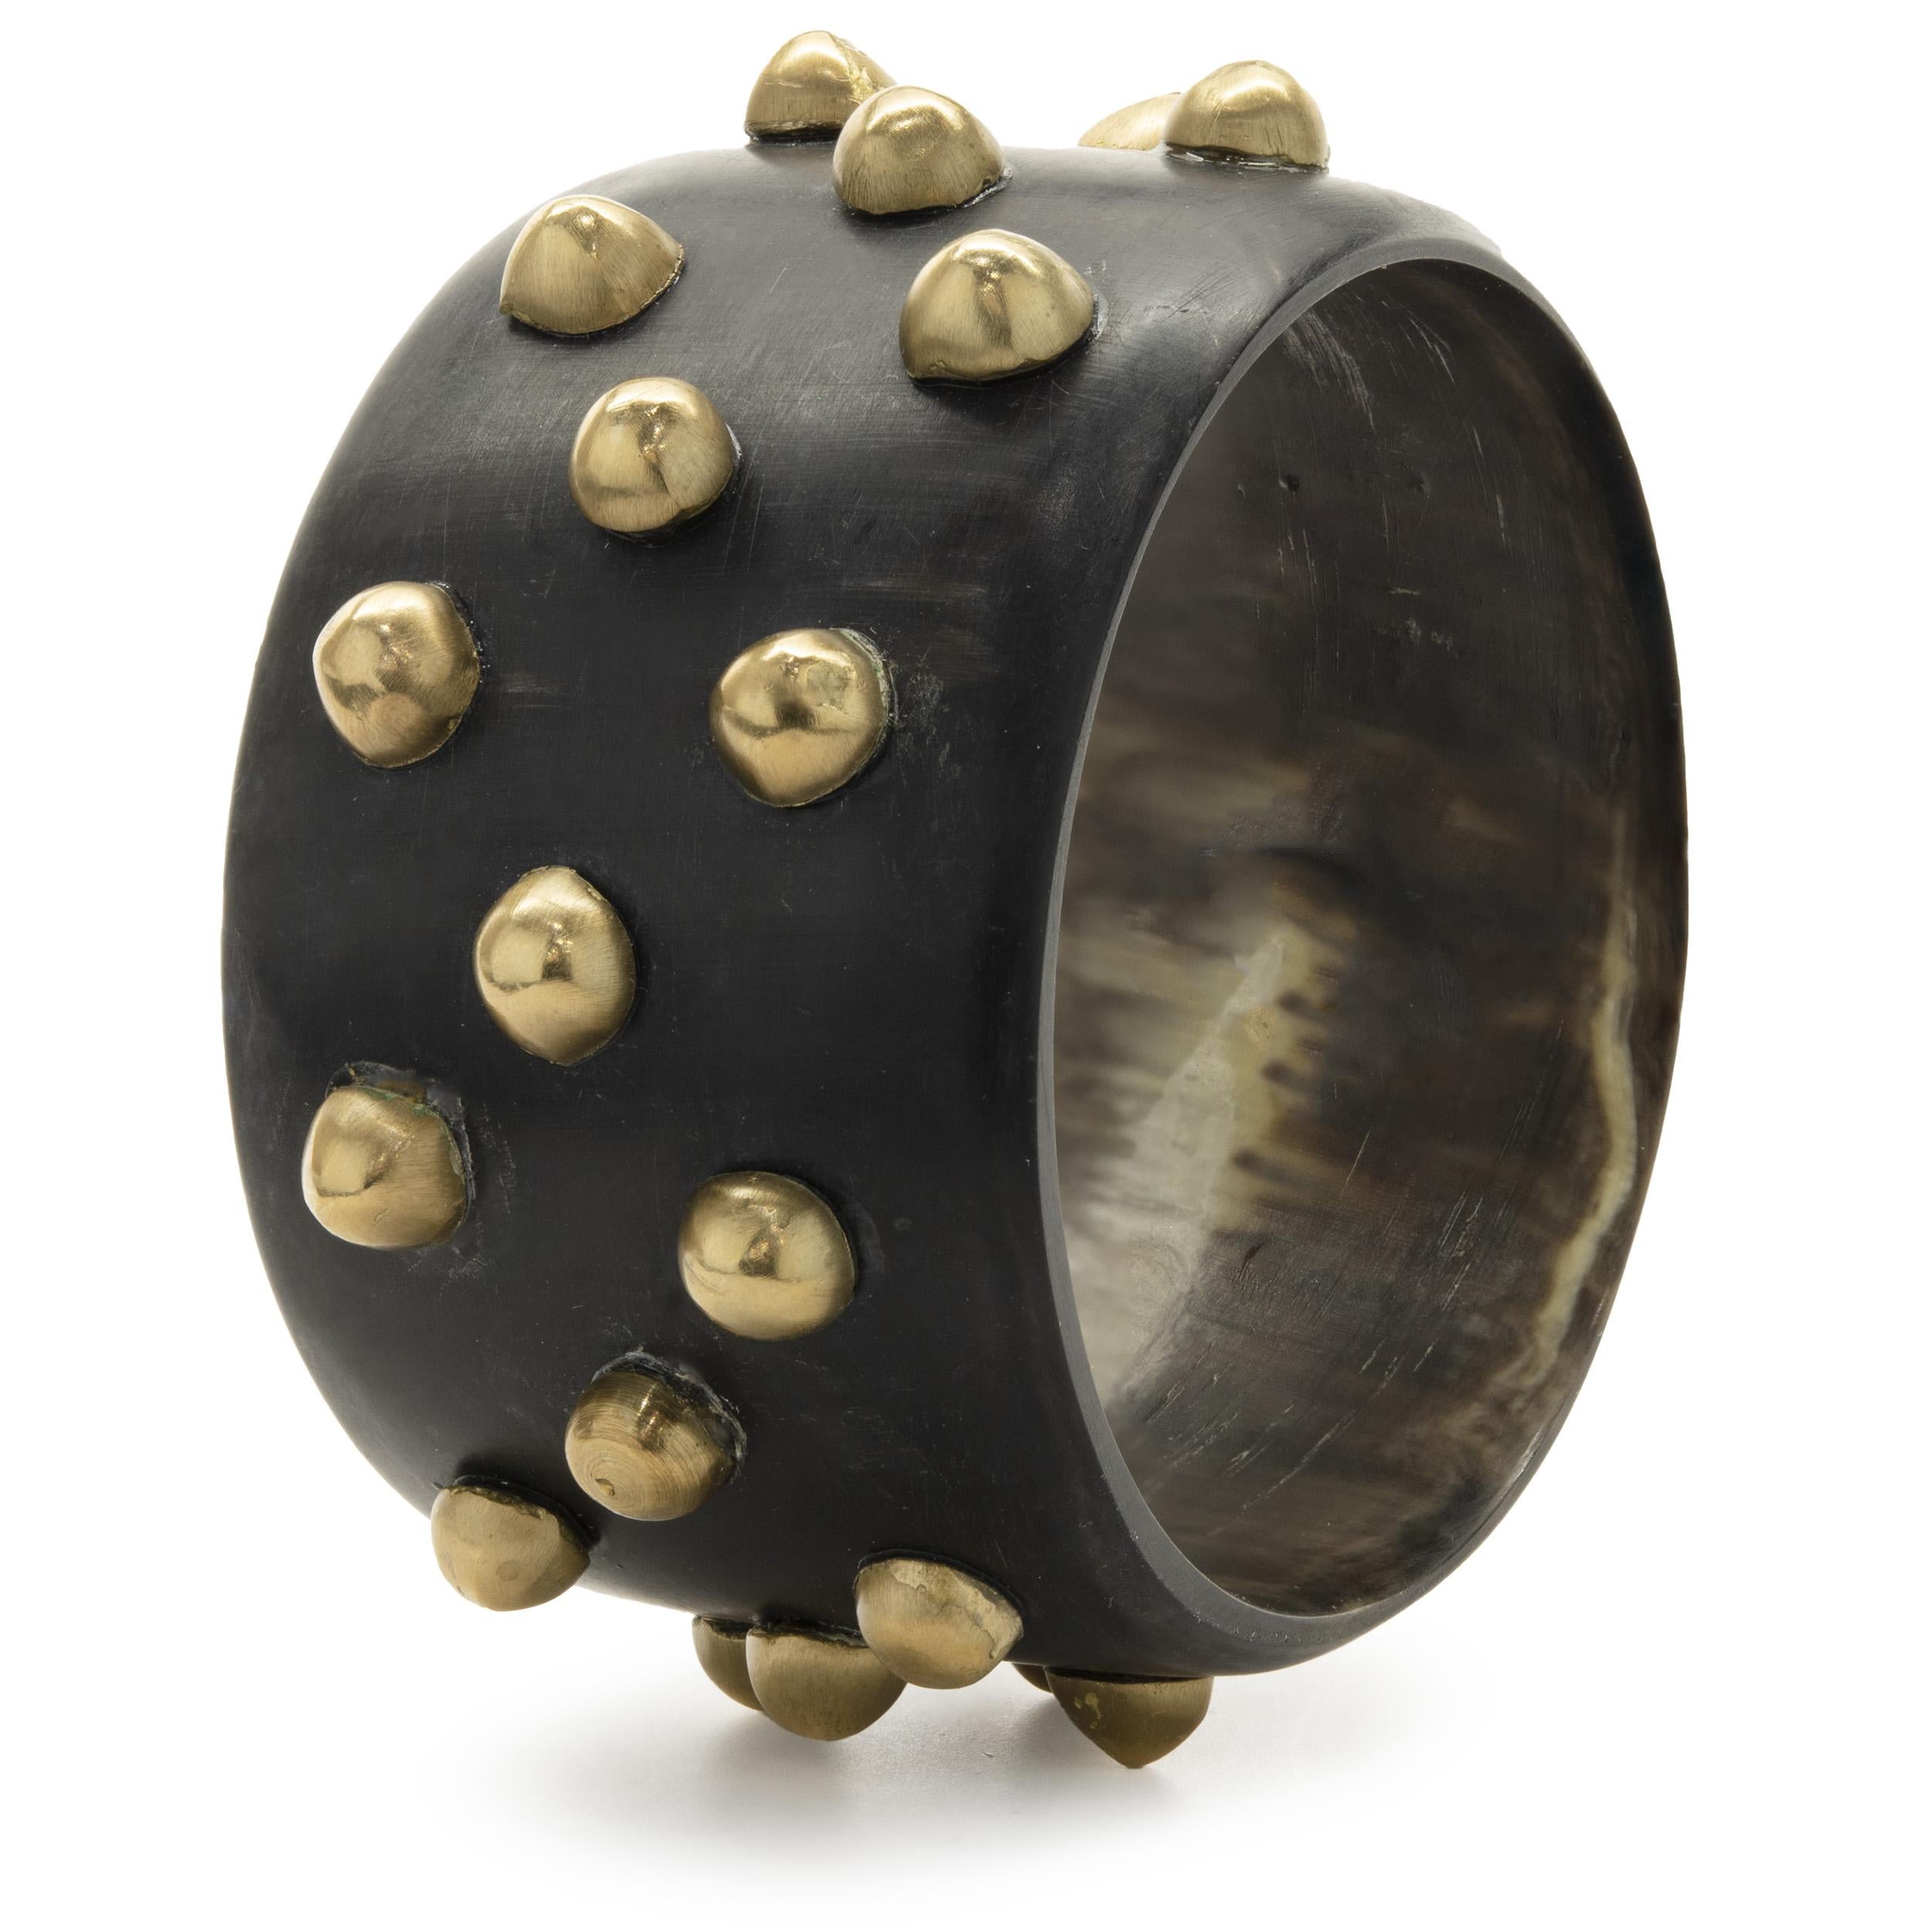 Black Acrylic Spike Cuff Bracelet In Excellent Condition For Sale In Scottsdale, AZ